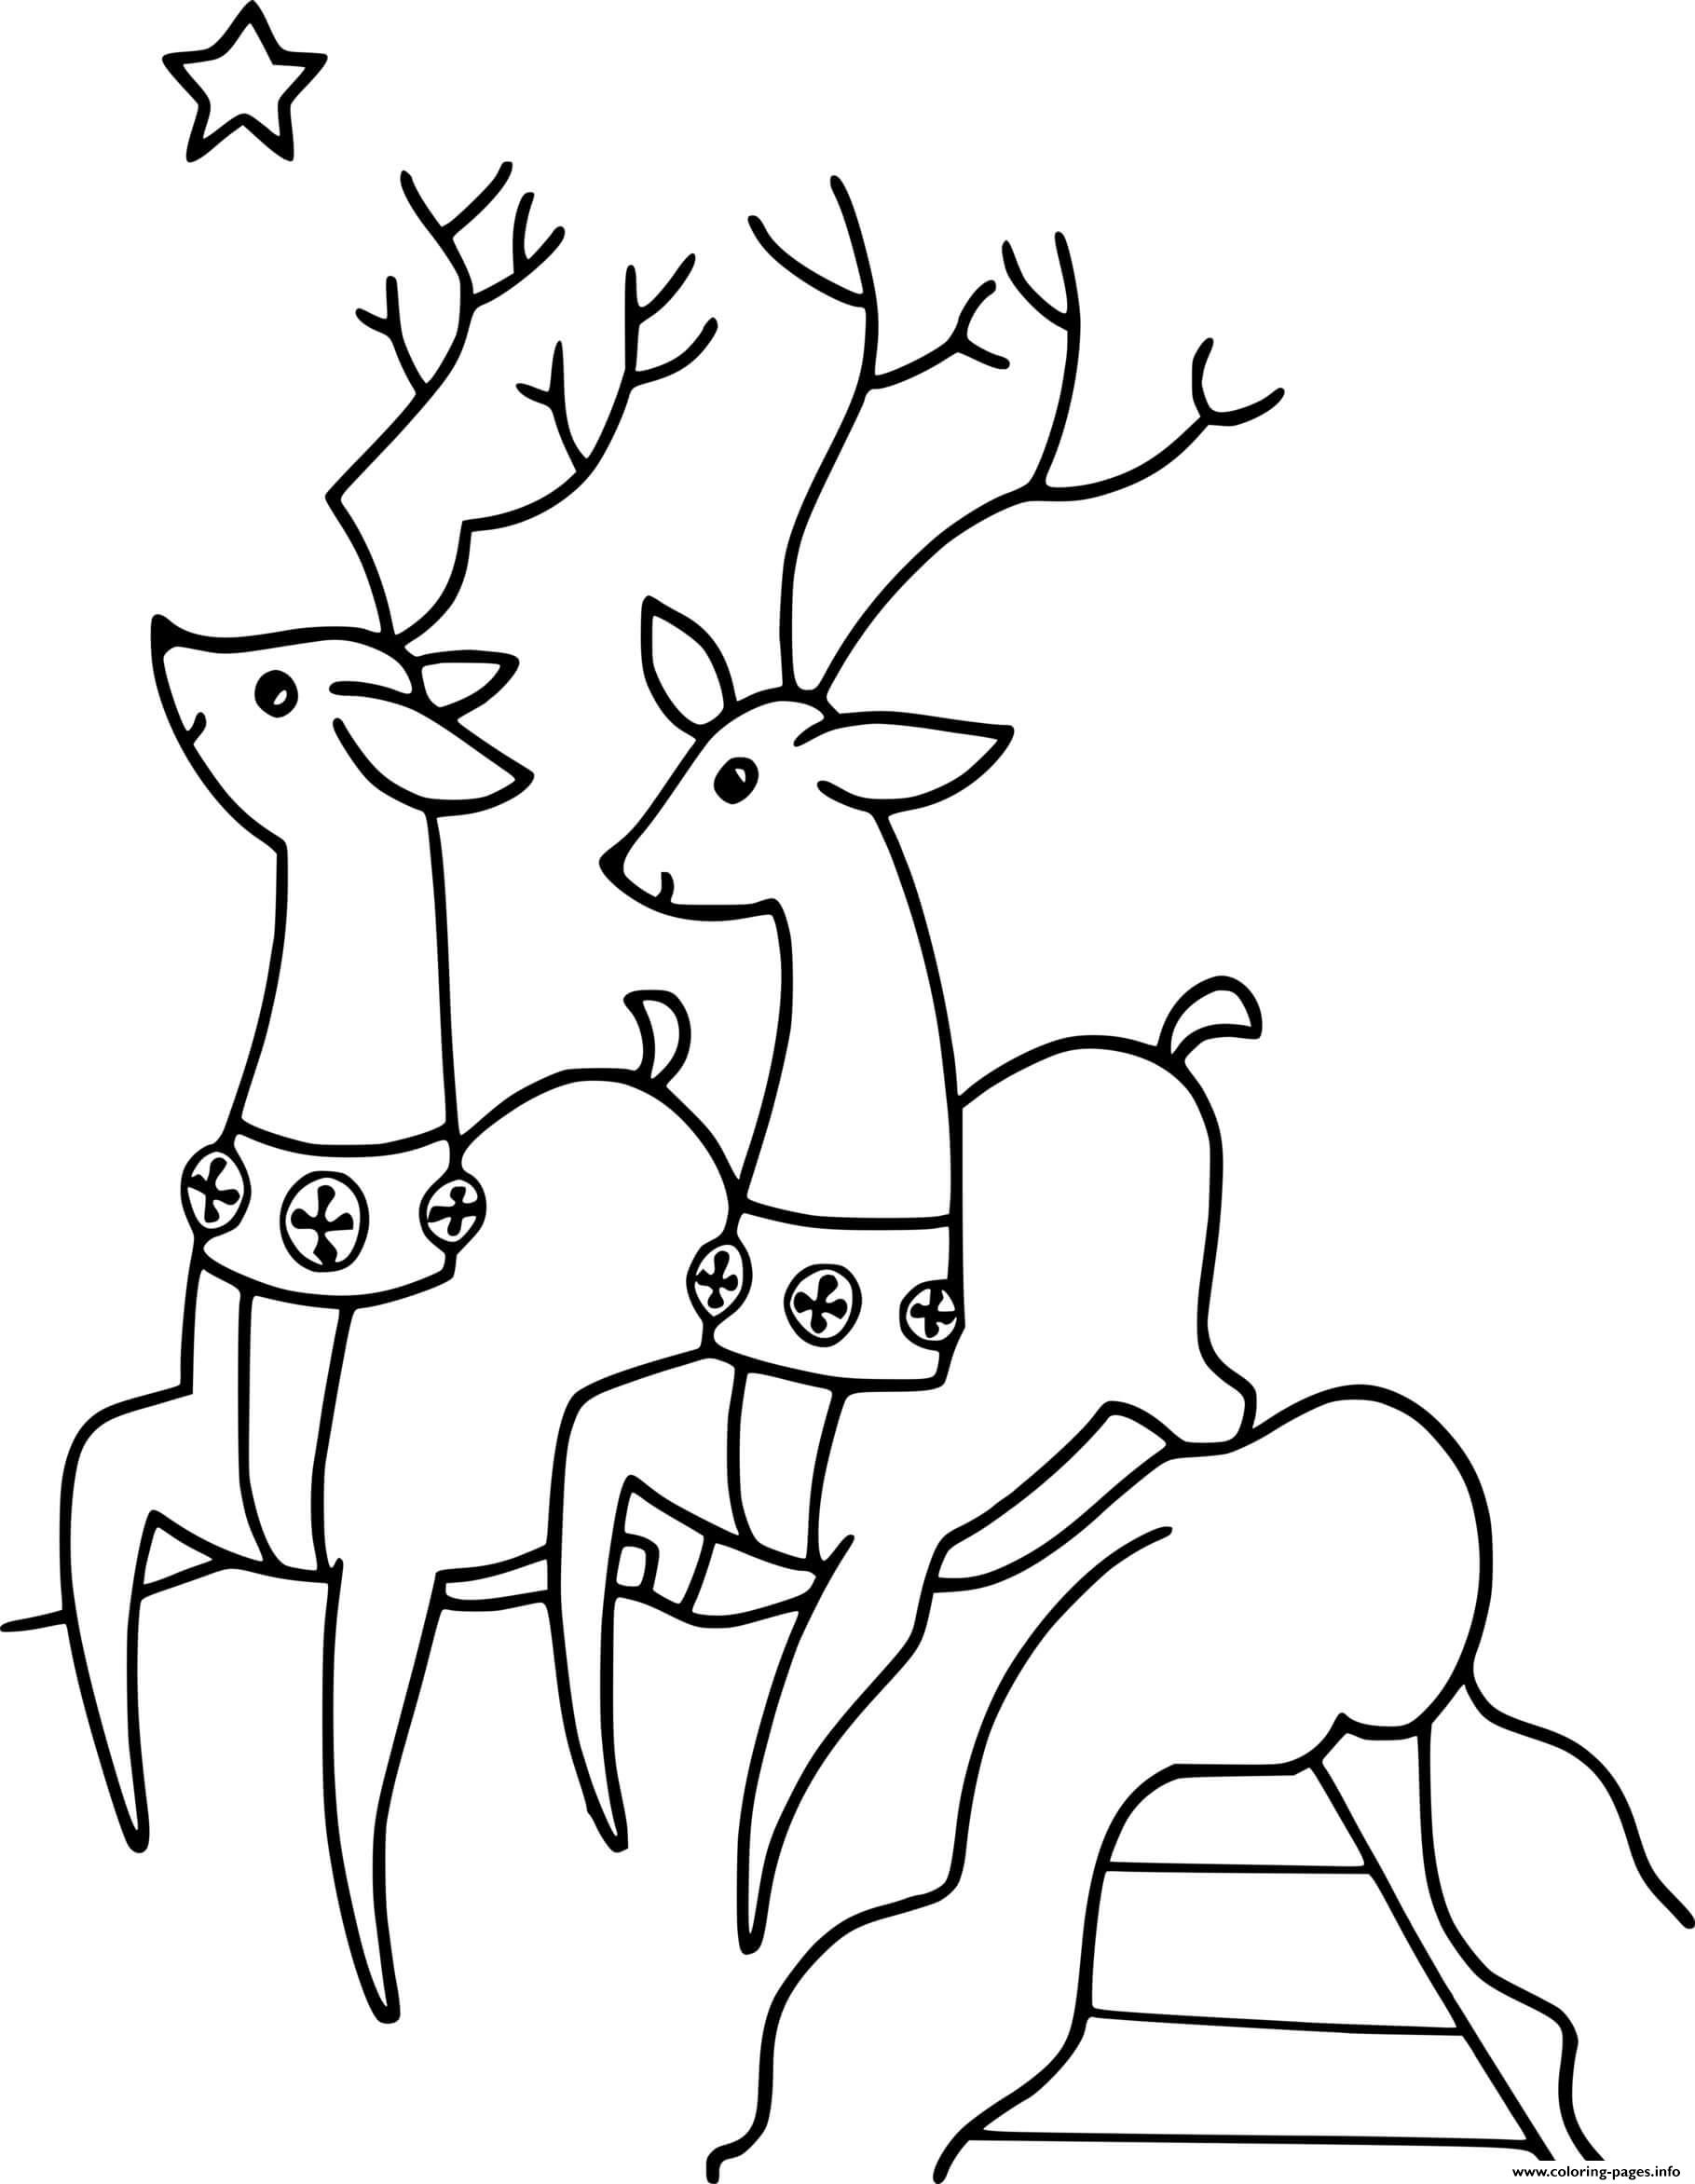 Two Simple Reindeer coloring pages